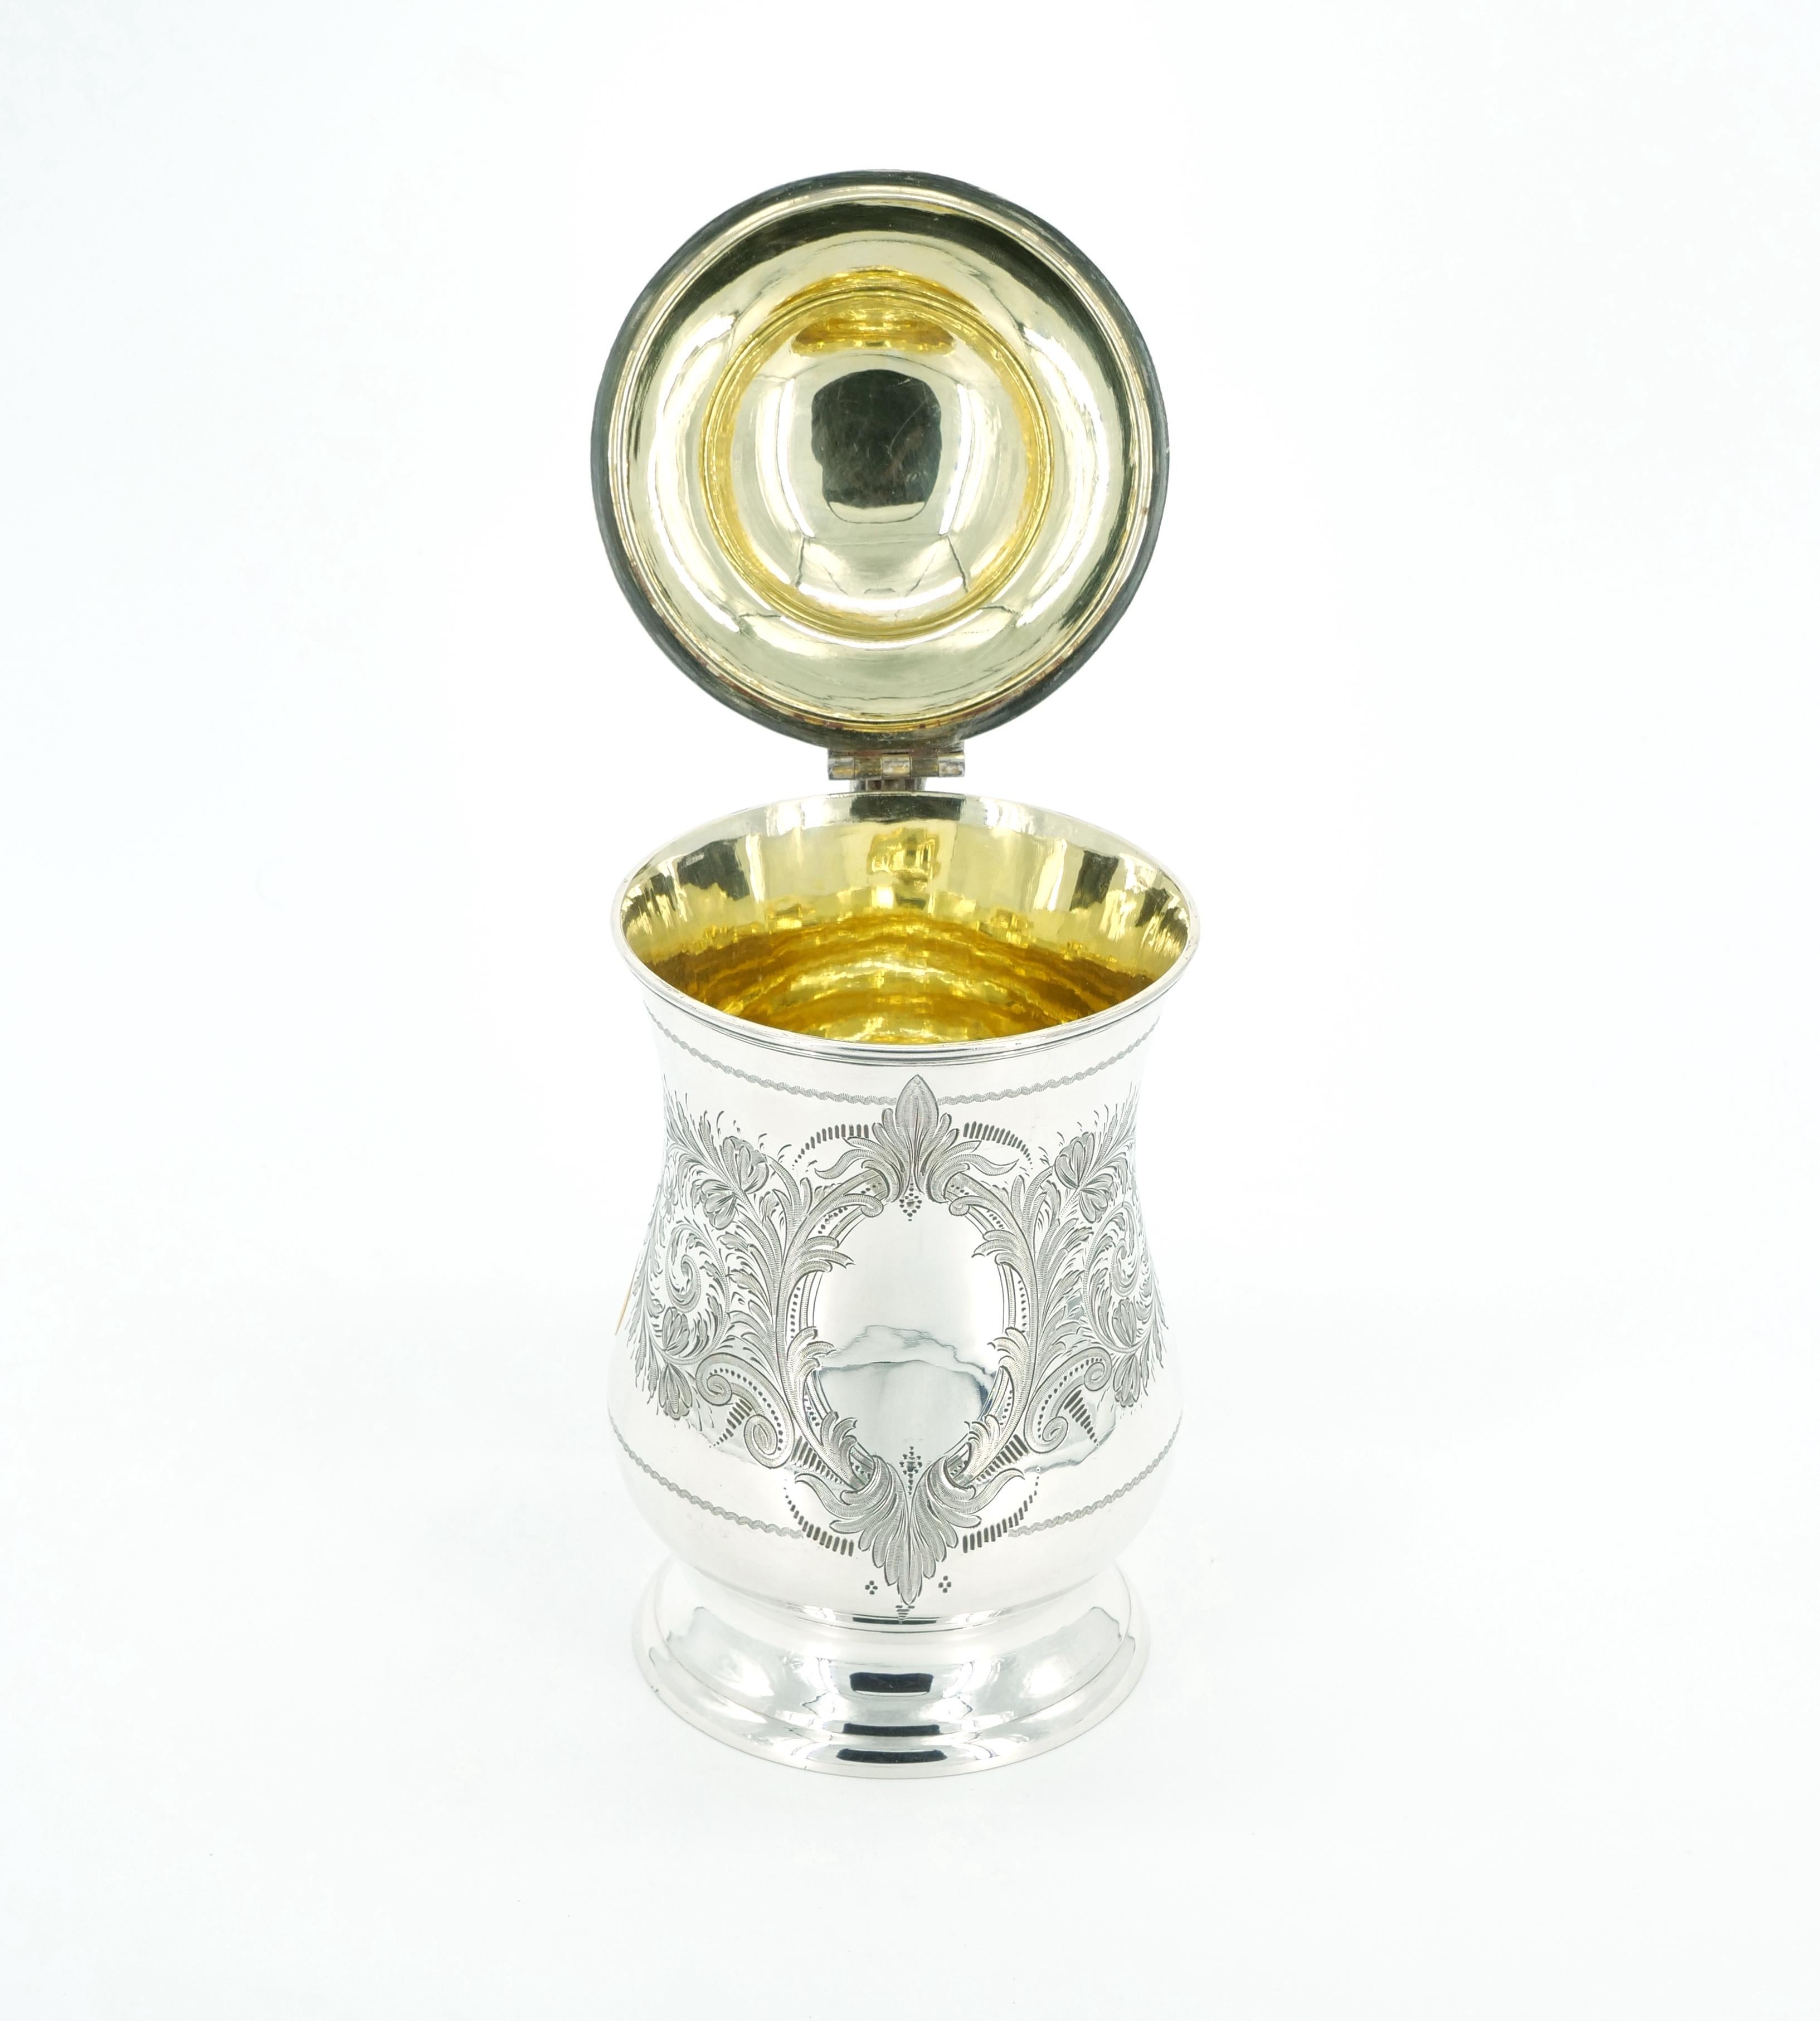 Early 19th Century English Silver Plate Engraved Exterior Queen Anne Tankard For Sale